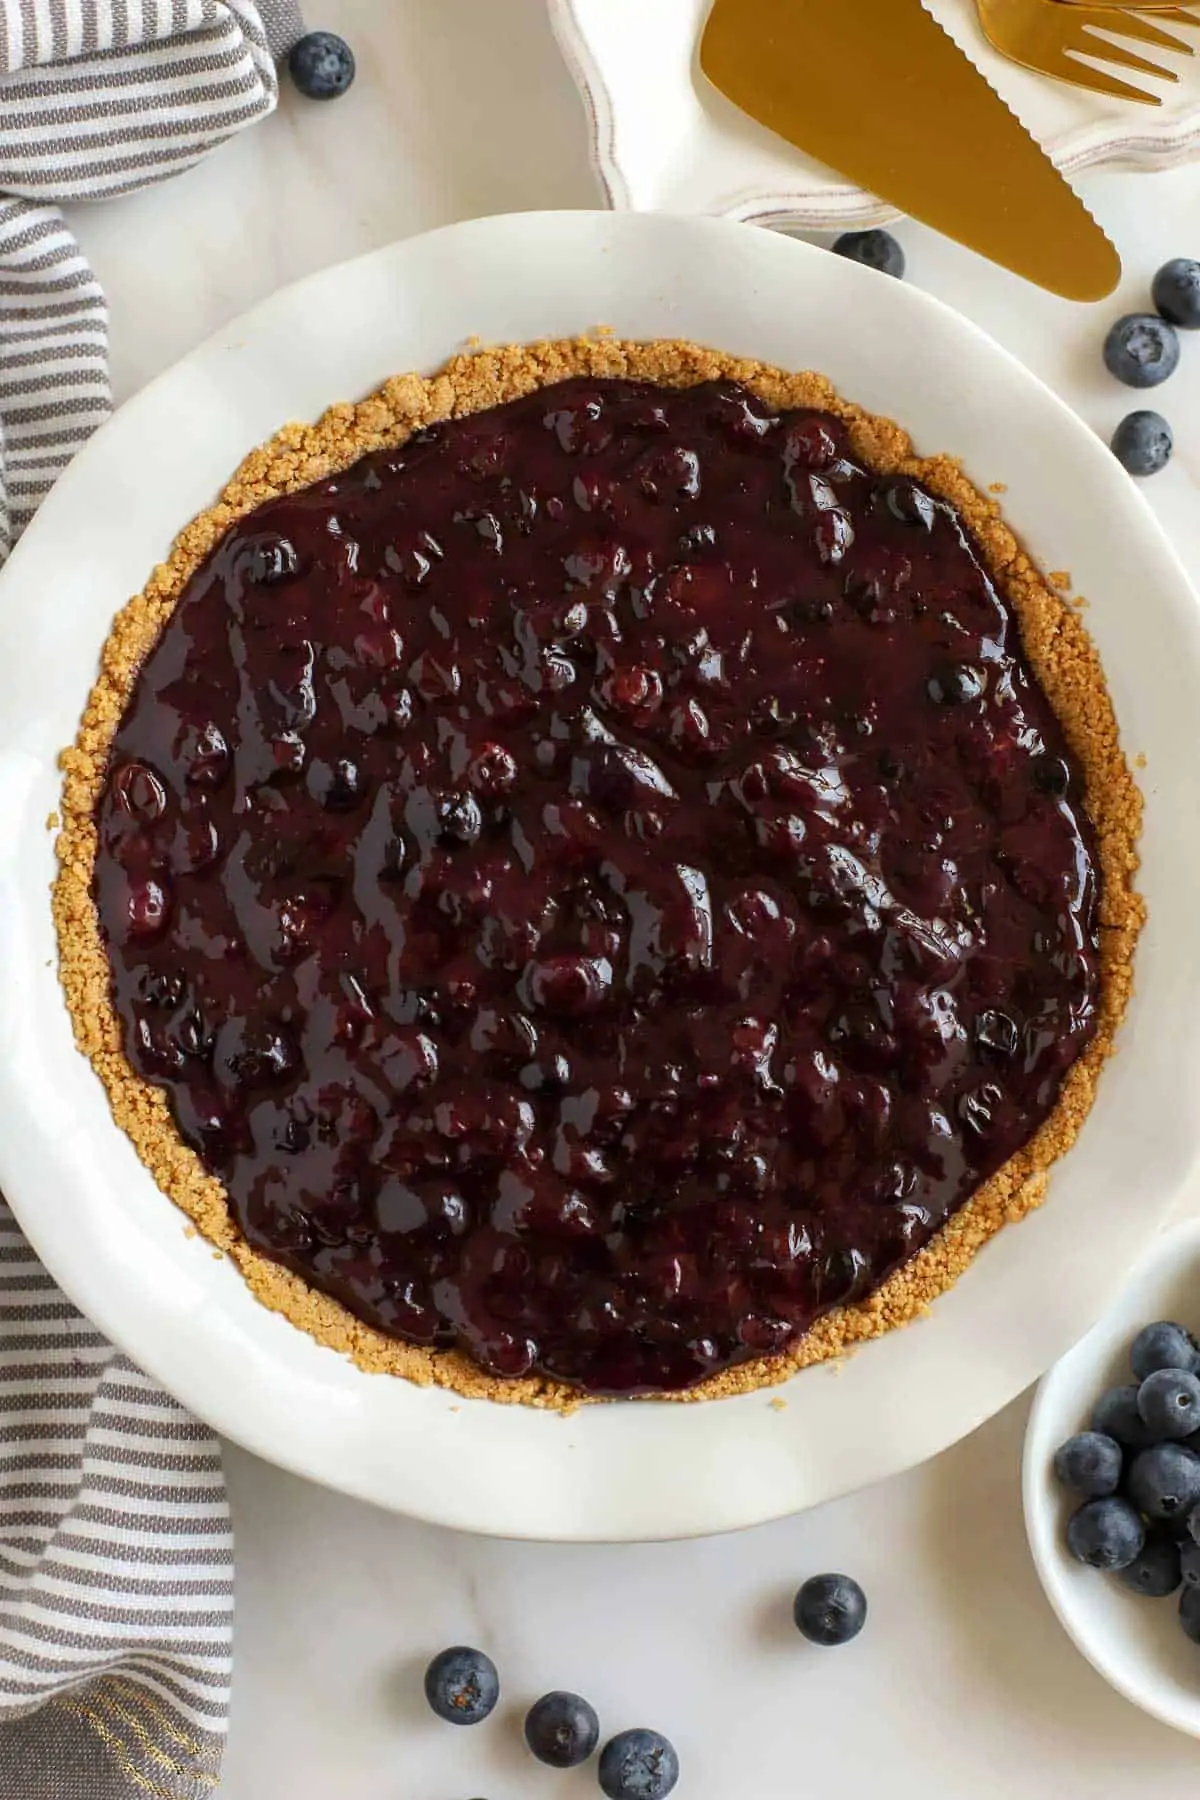 Blueberry pie filling in a graham cracker crust surrounded by fresh blueberries.